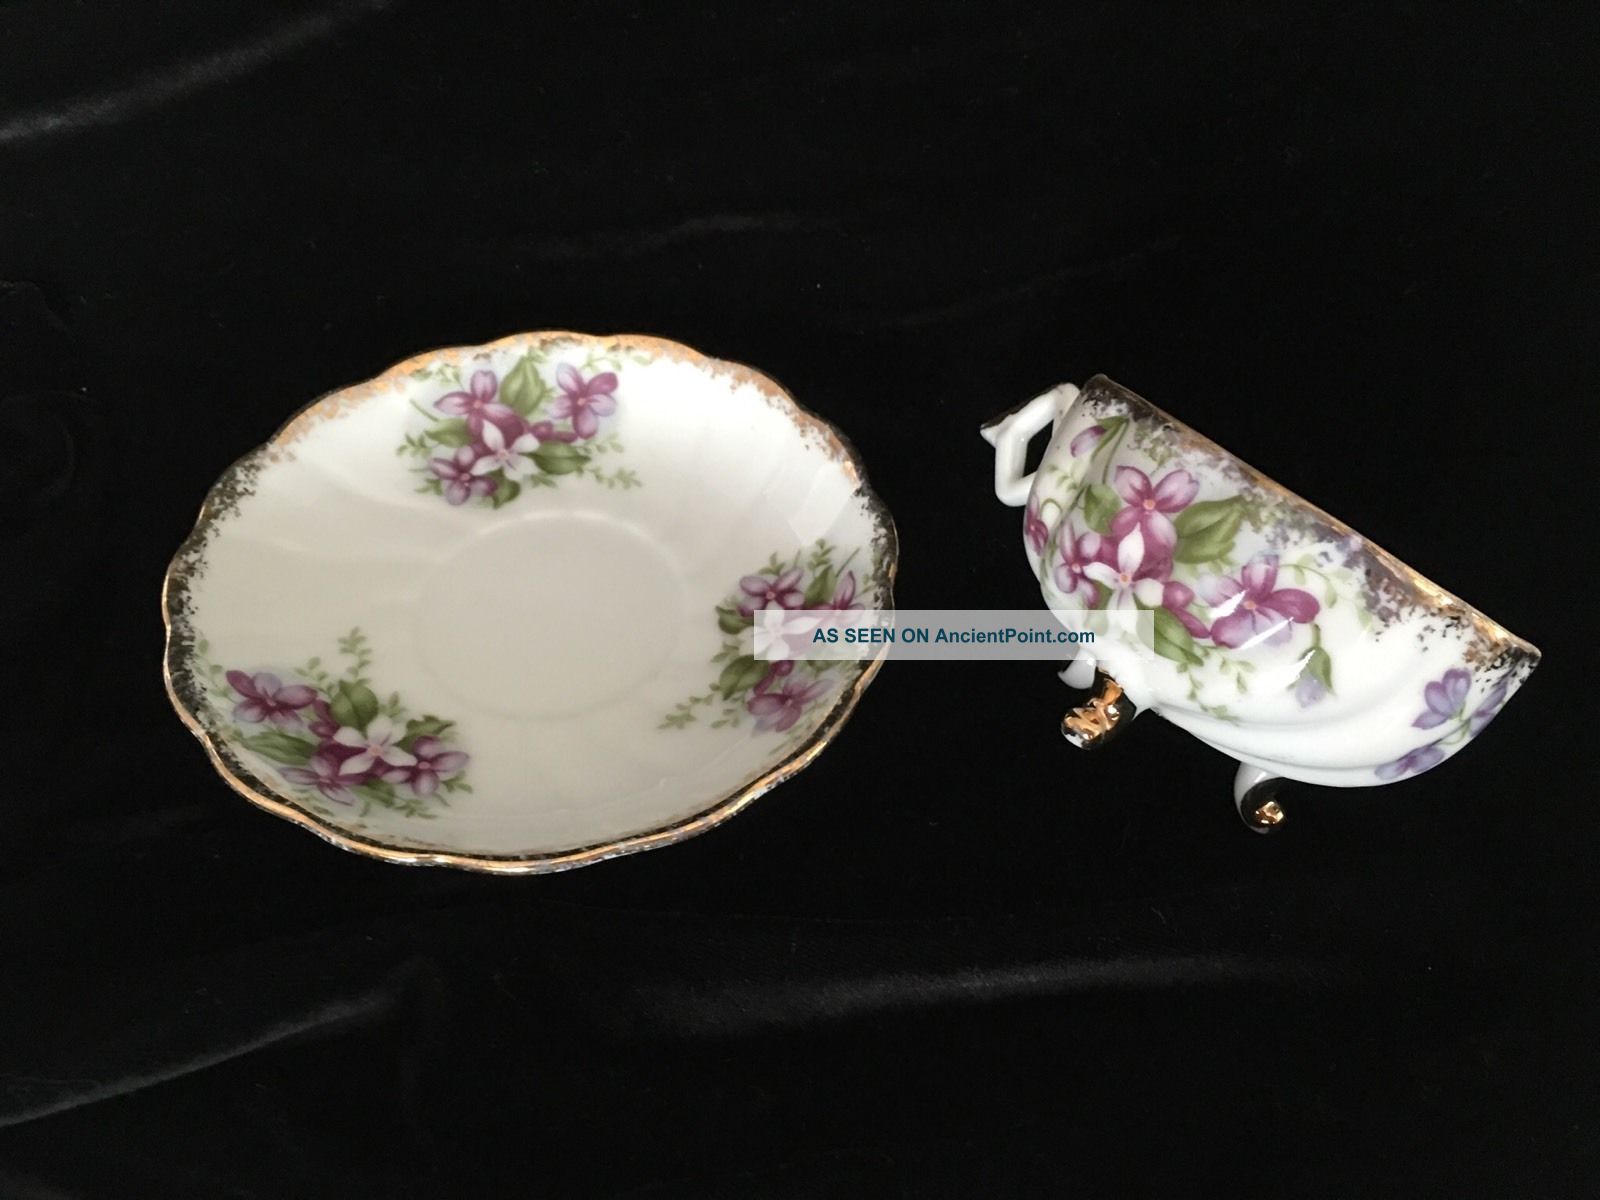 Vintage Old Trimont Ware China Hand Tea Cup With Feet And Saucer Japan Rare Cups & Saucers photo